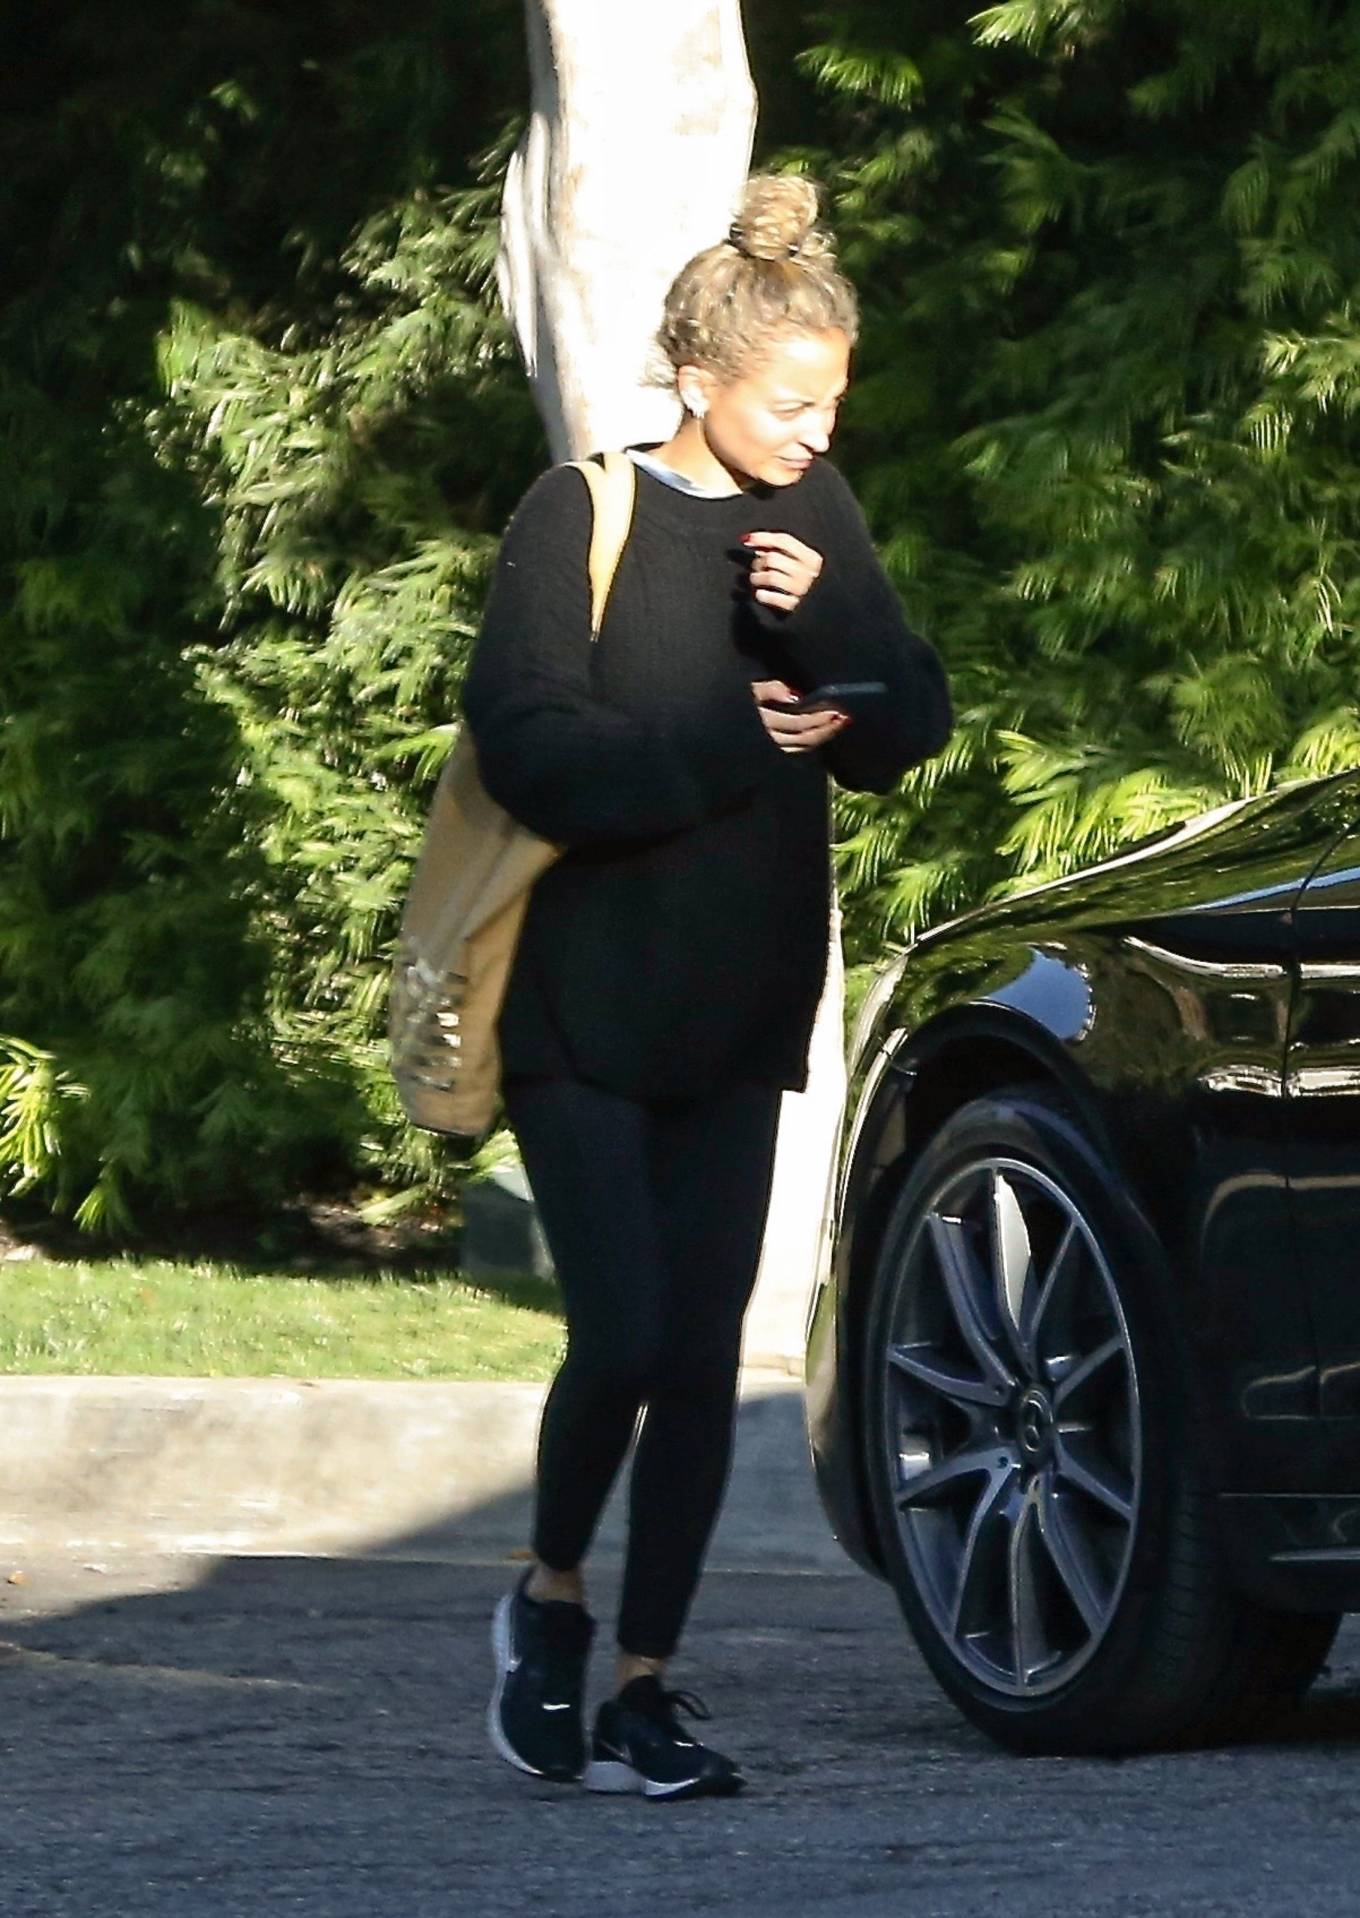 Nicole Richie visiting a friend in West Hollywood